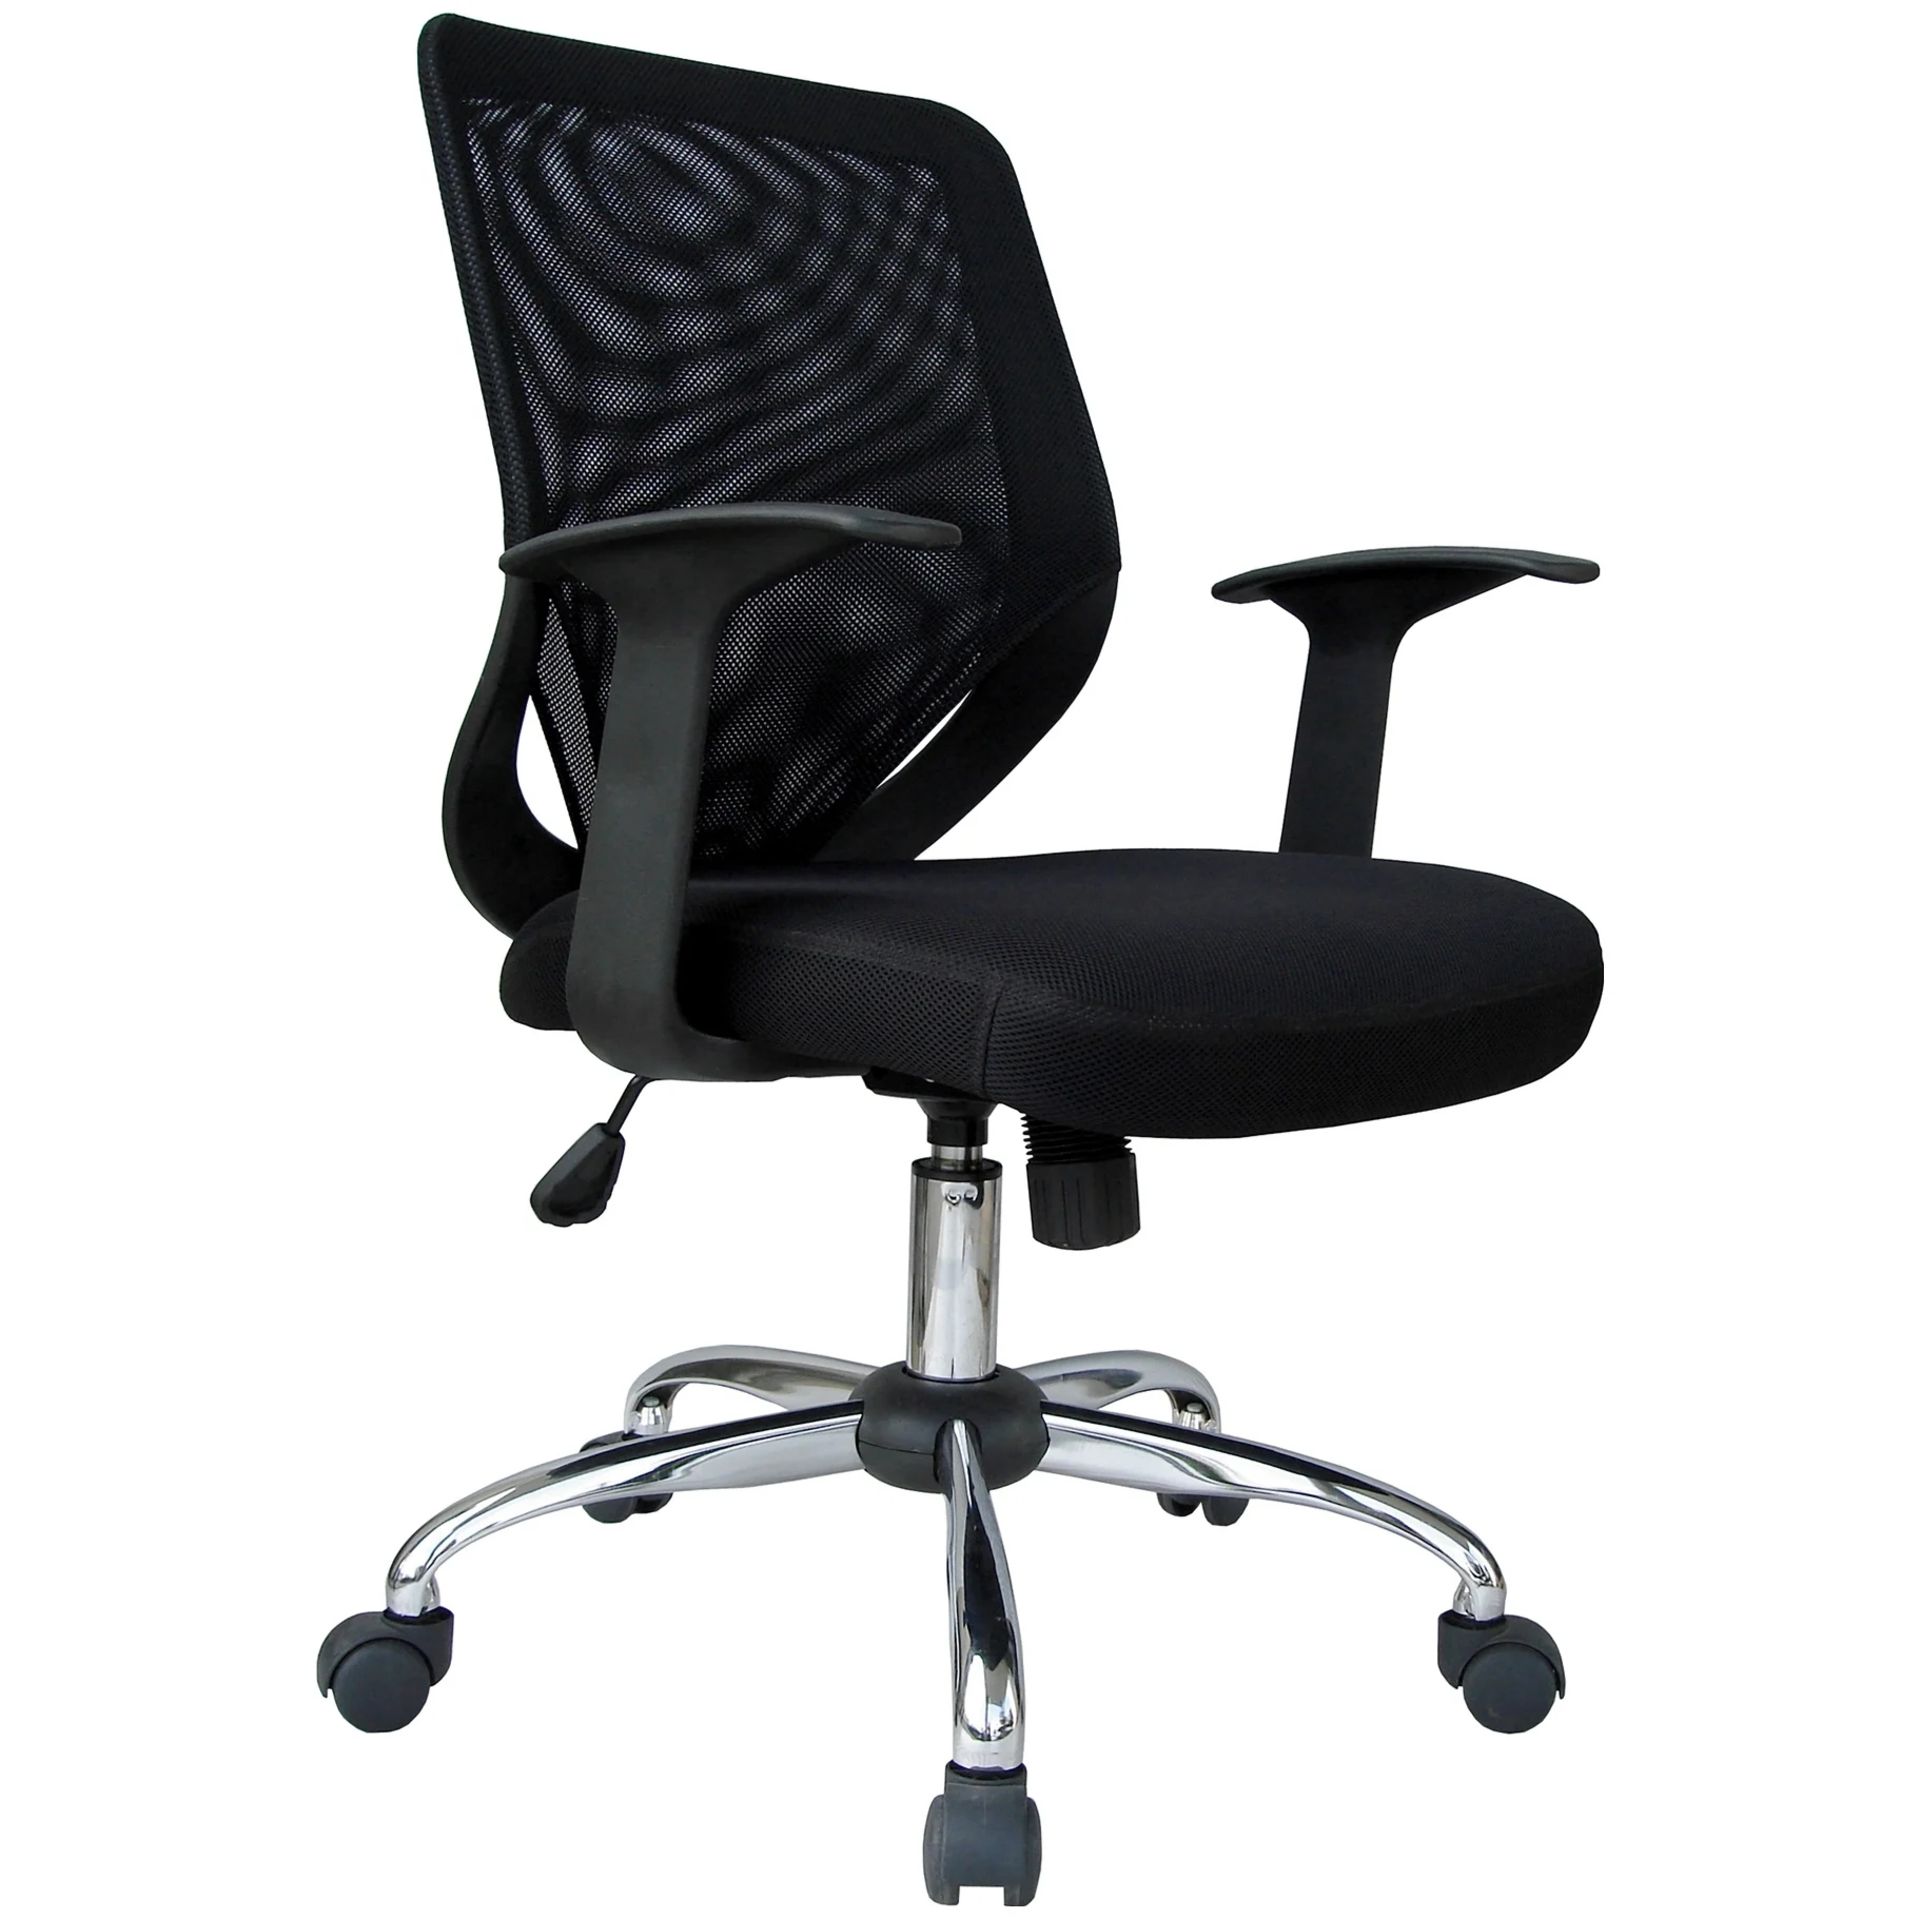 BRAND NEW OFFICE INTERIORS BLACK MESH SPINE CHAIR RRP £219 R9-6 - Image 2 of 2